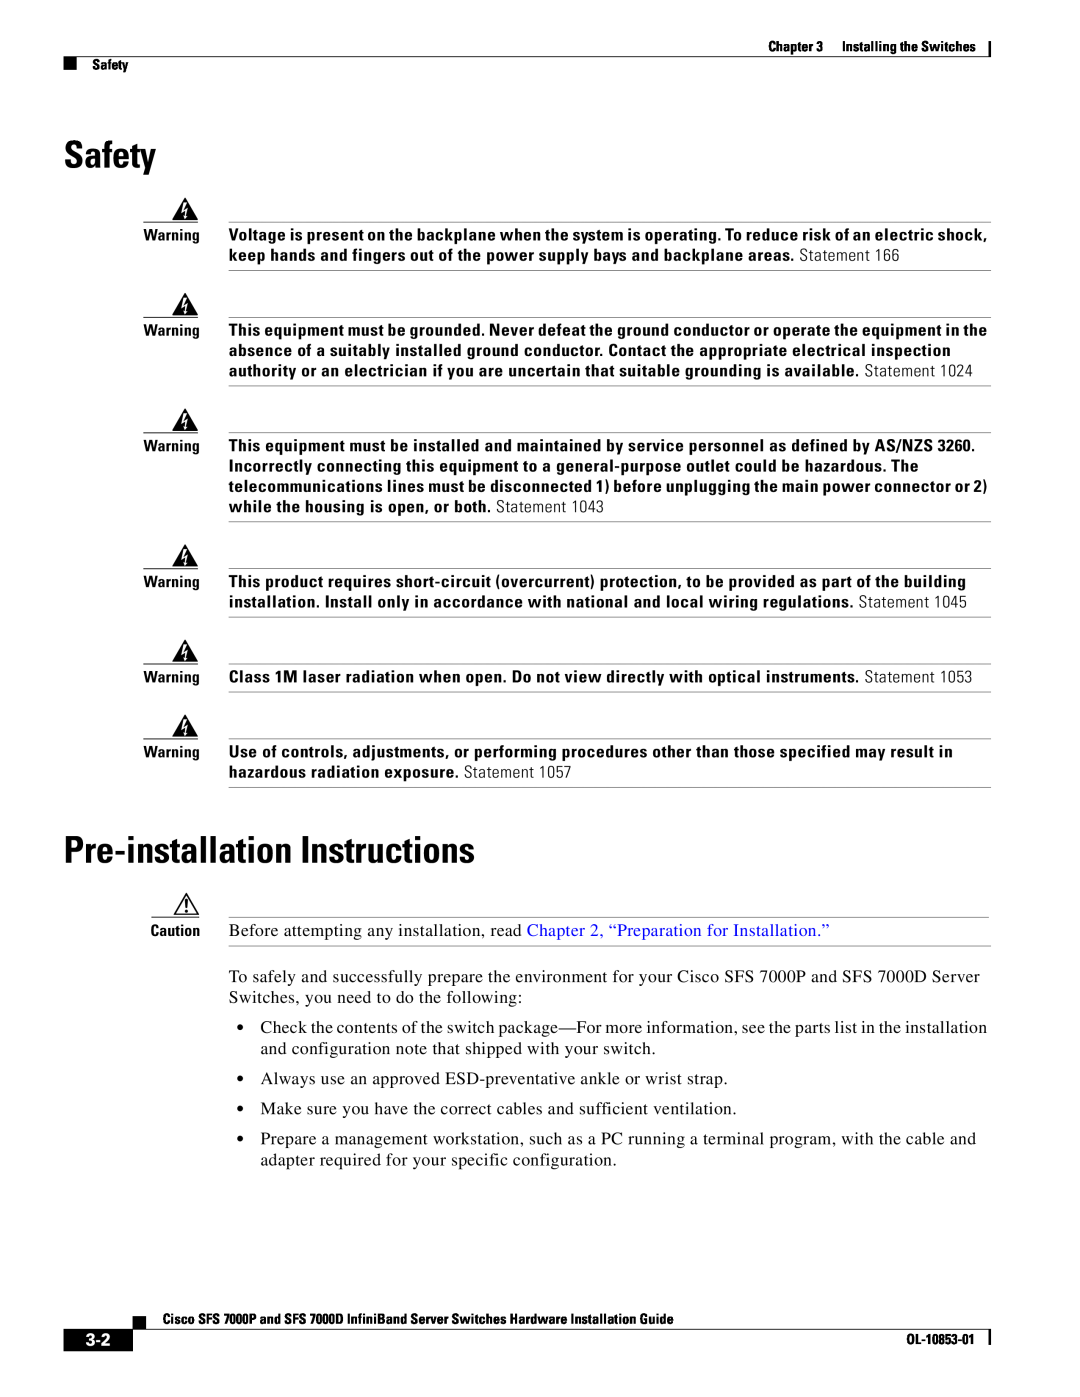 Cisco Systems SFS 7000P, SFS 7000D manual Pre-installation Instructions, Safety 